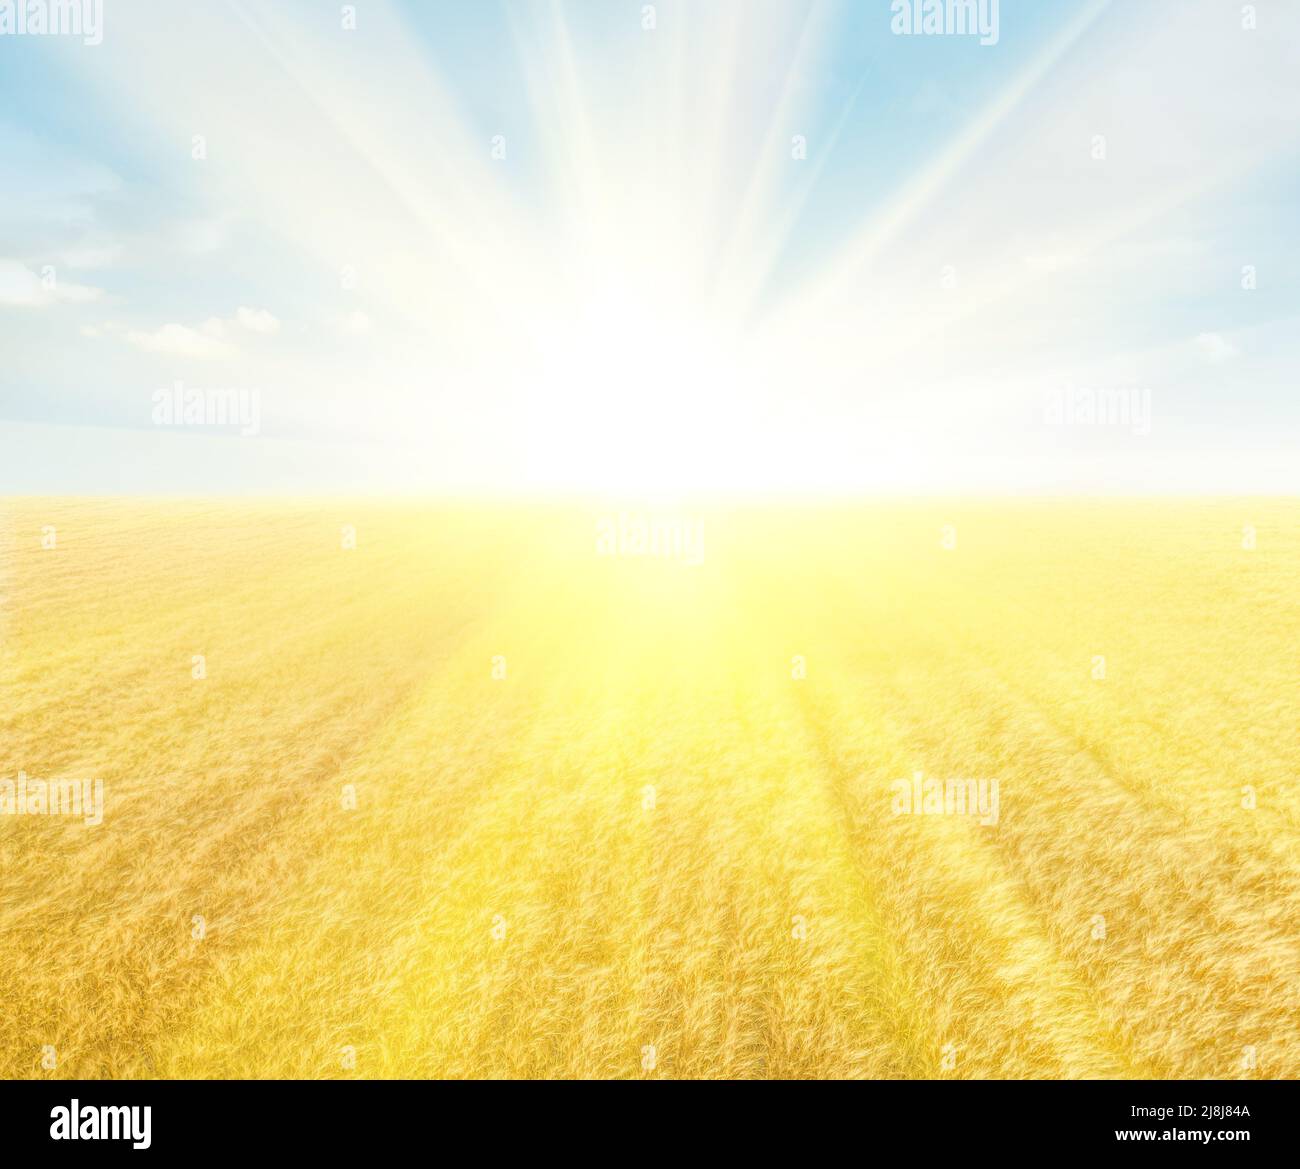 Shining sun over a field of golden wheat and light blue sky, abstract background Stock Photo